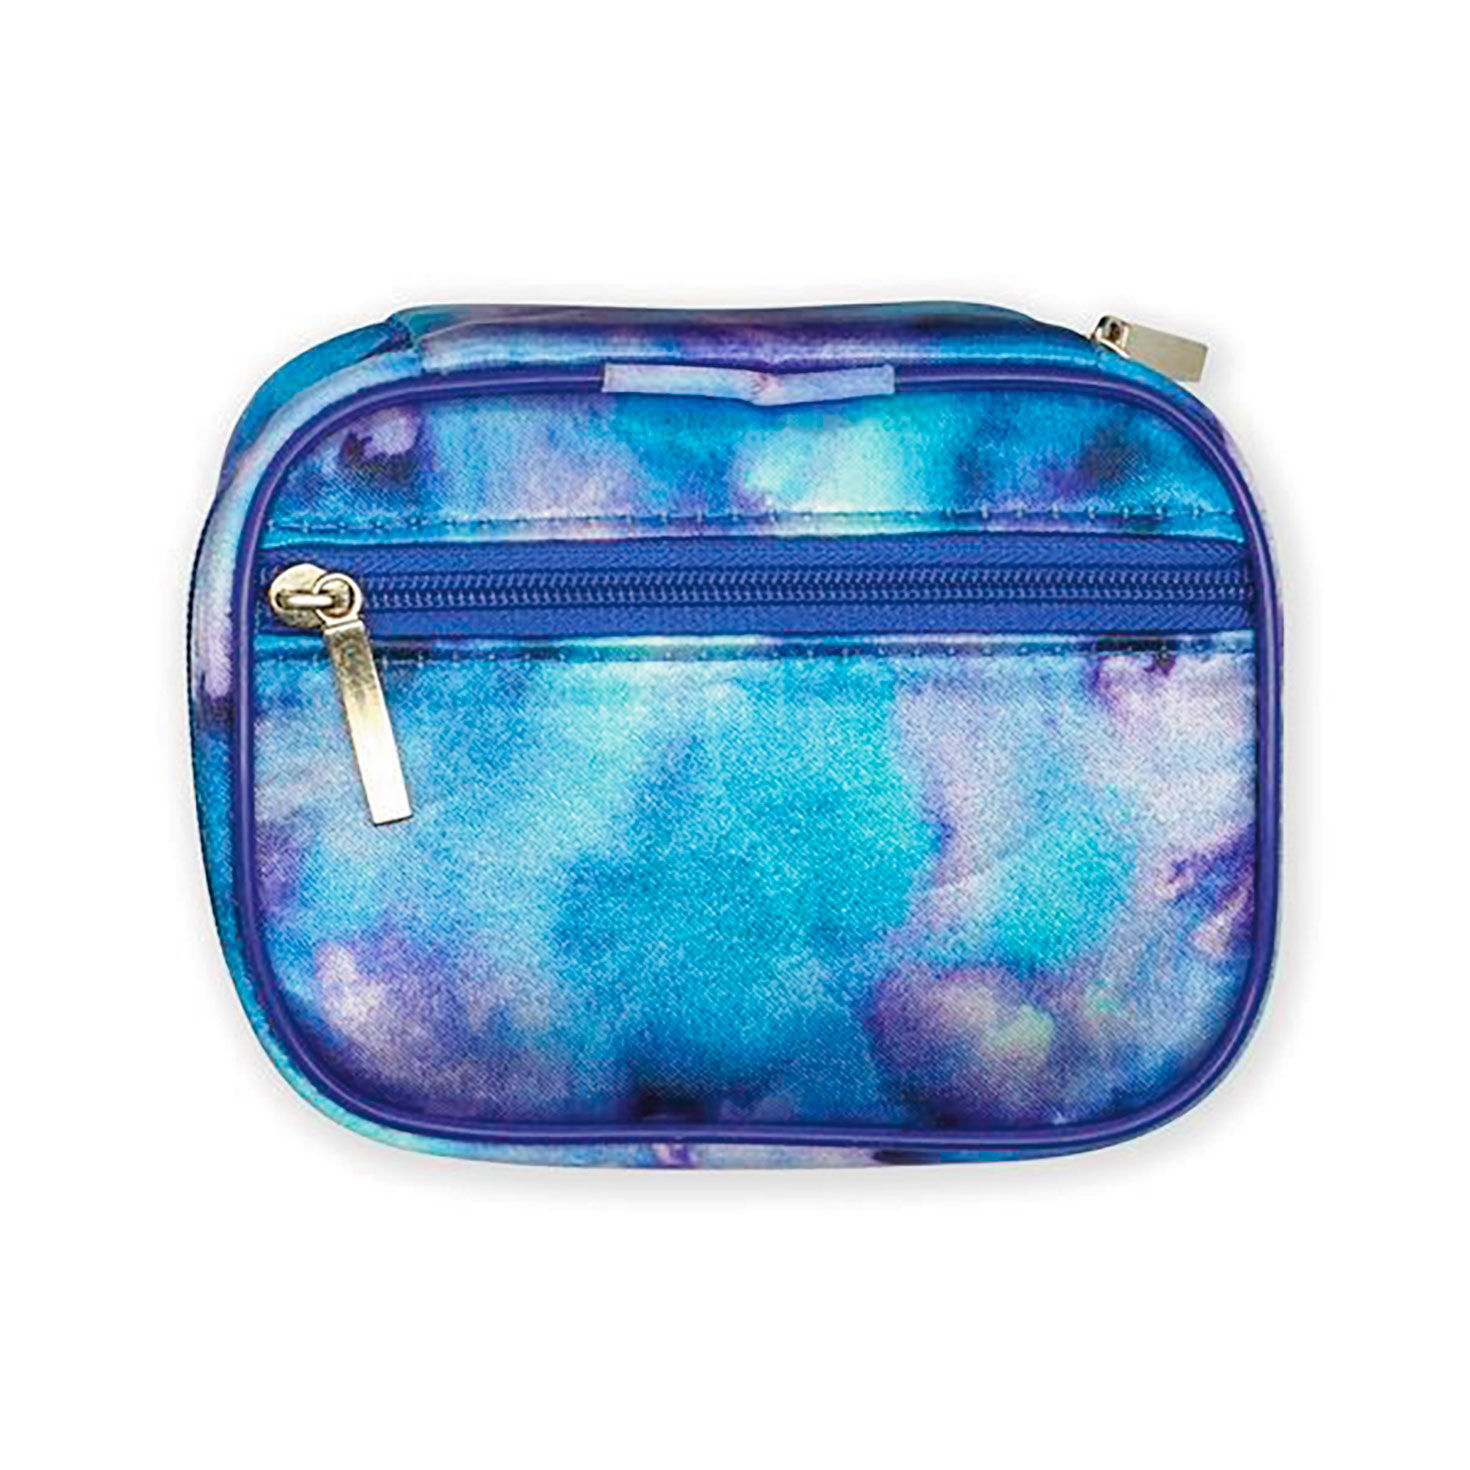 Wellness Keeper Travel Zip Pill Case in Cloud 9 for only USD 9.99 | Hallmark